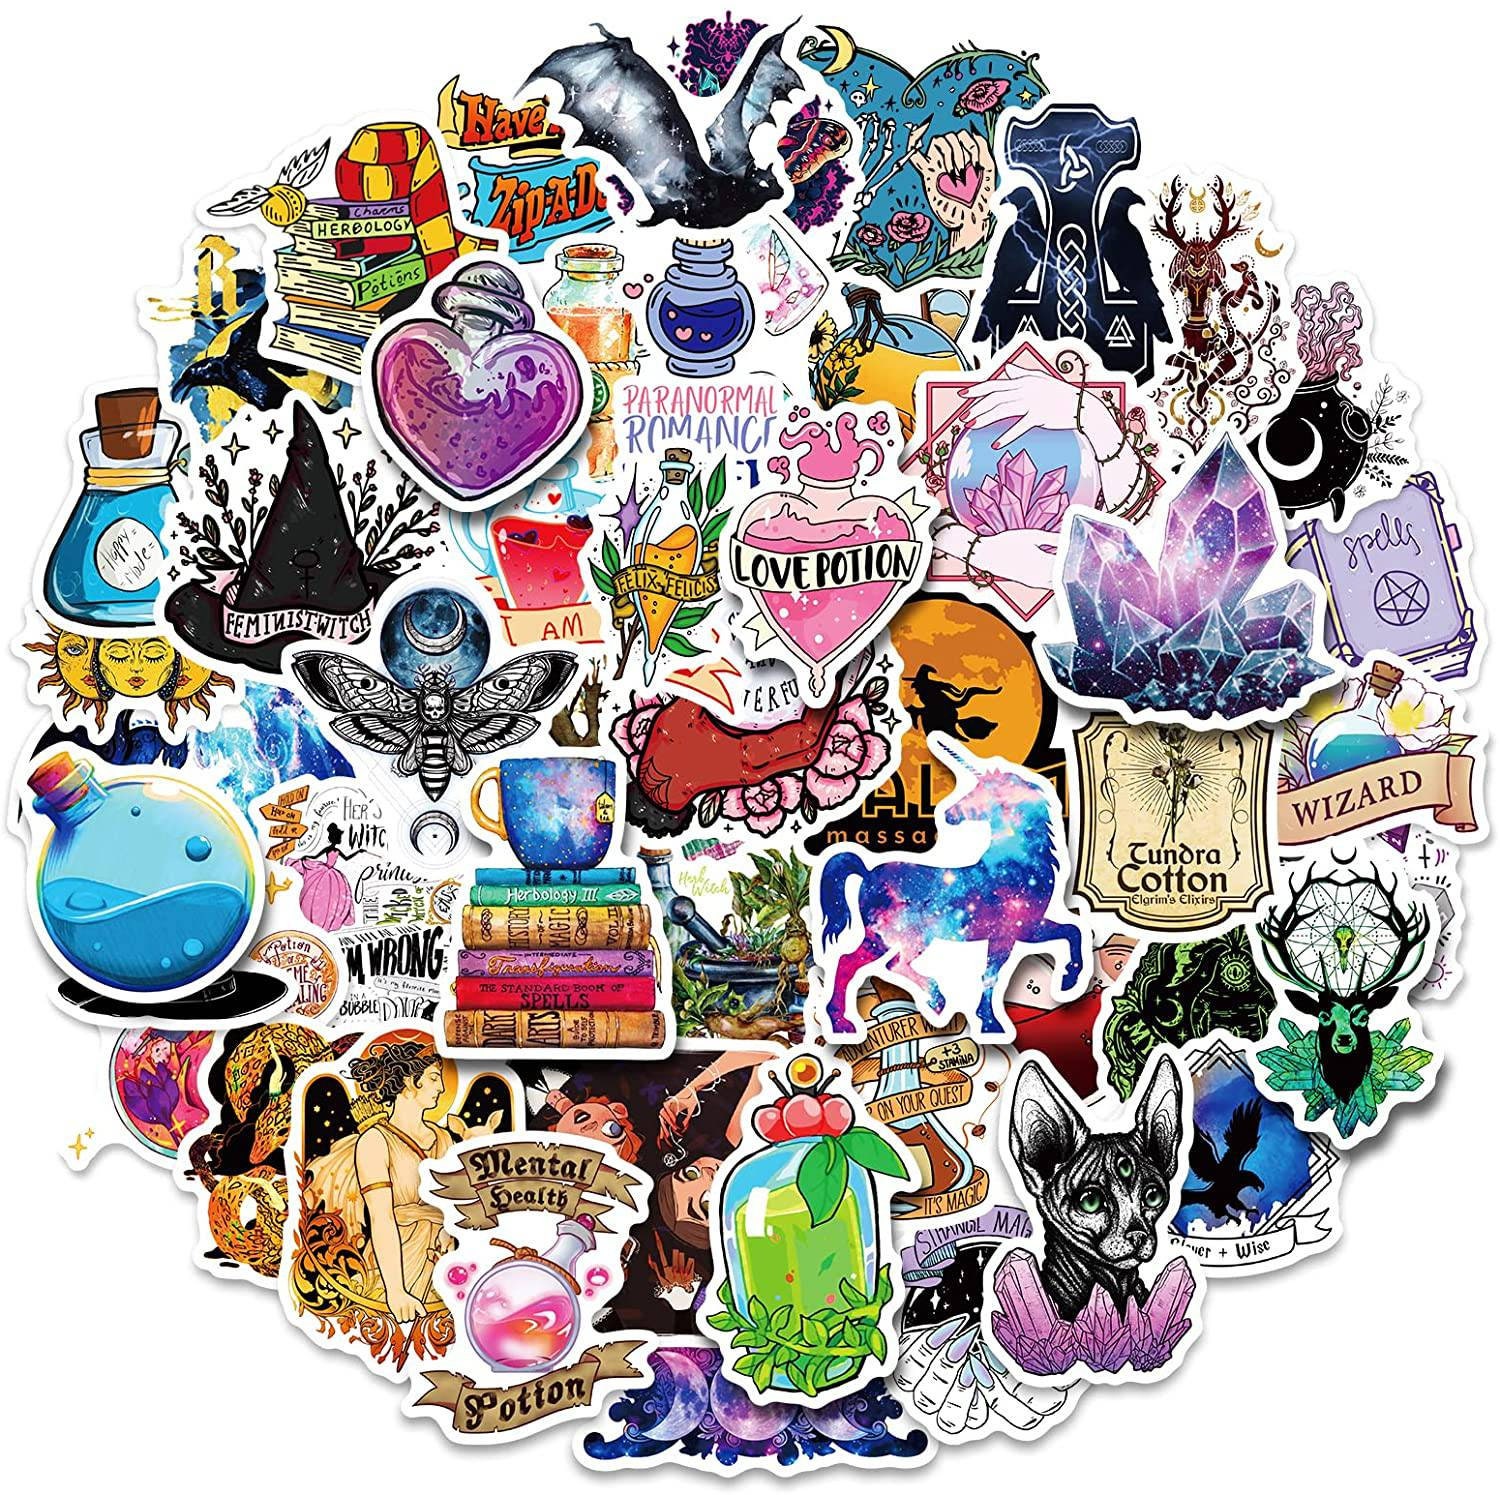 Fantasy Stickers, Witch Stickers, Magic and Supernatural stickers -  Non-toxic, Water, UV, and Scratch Resistant!